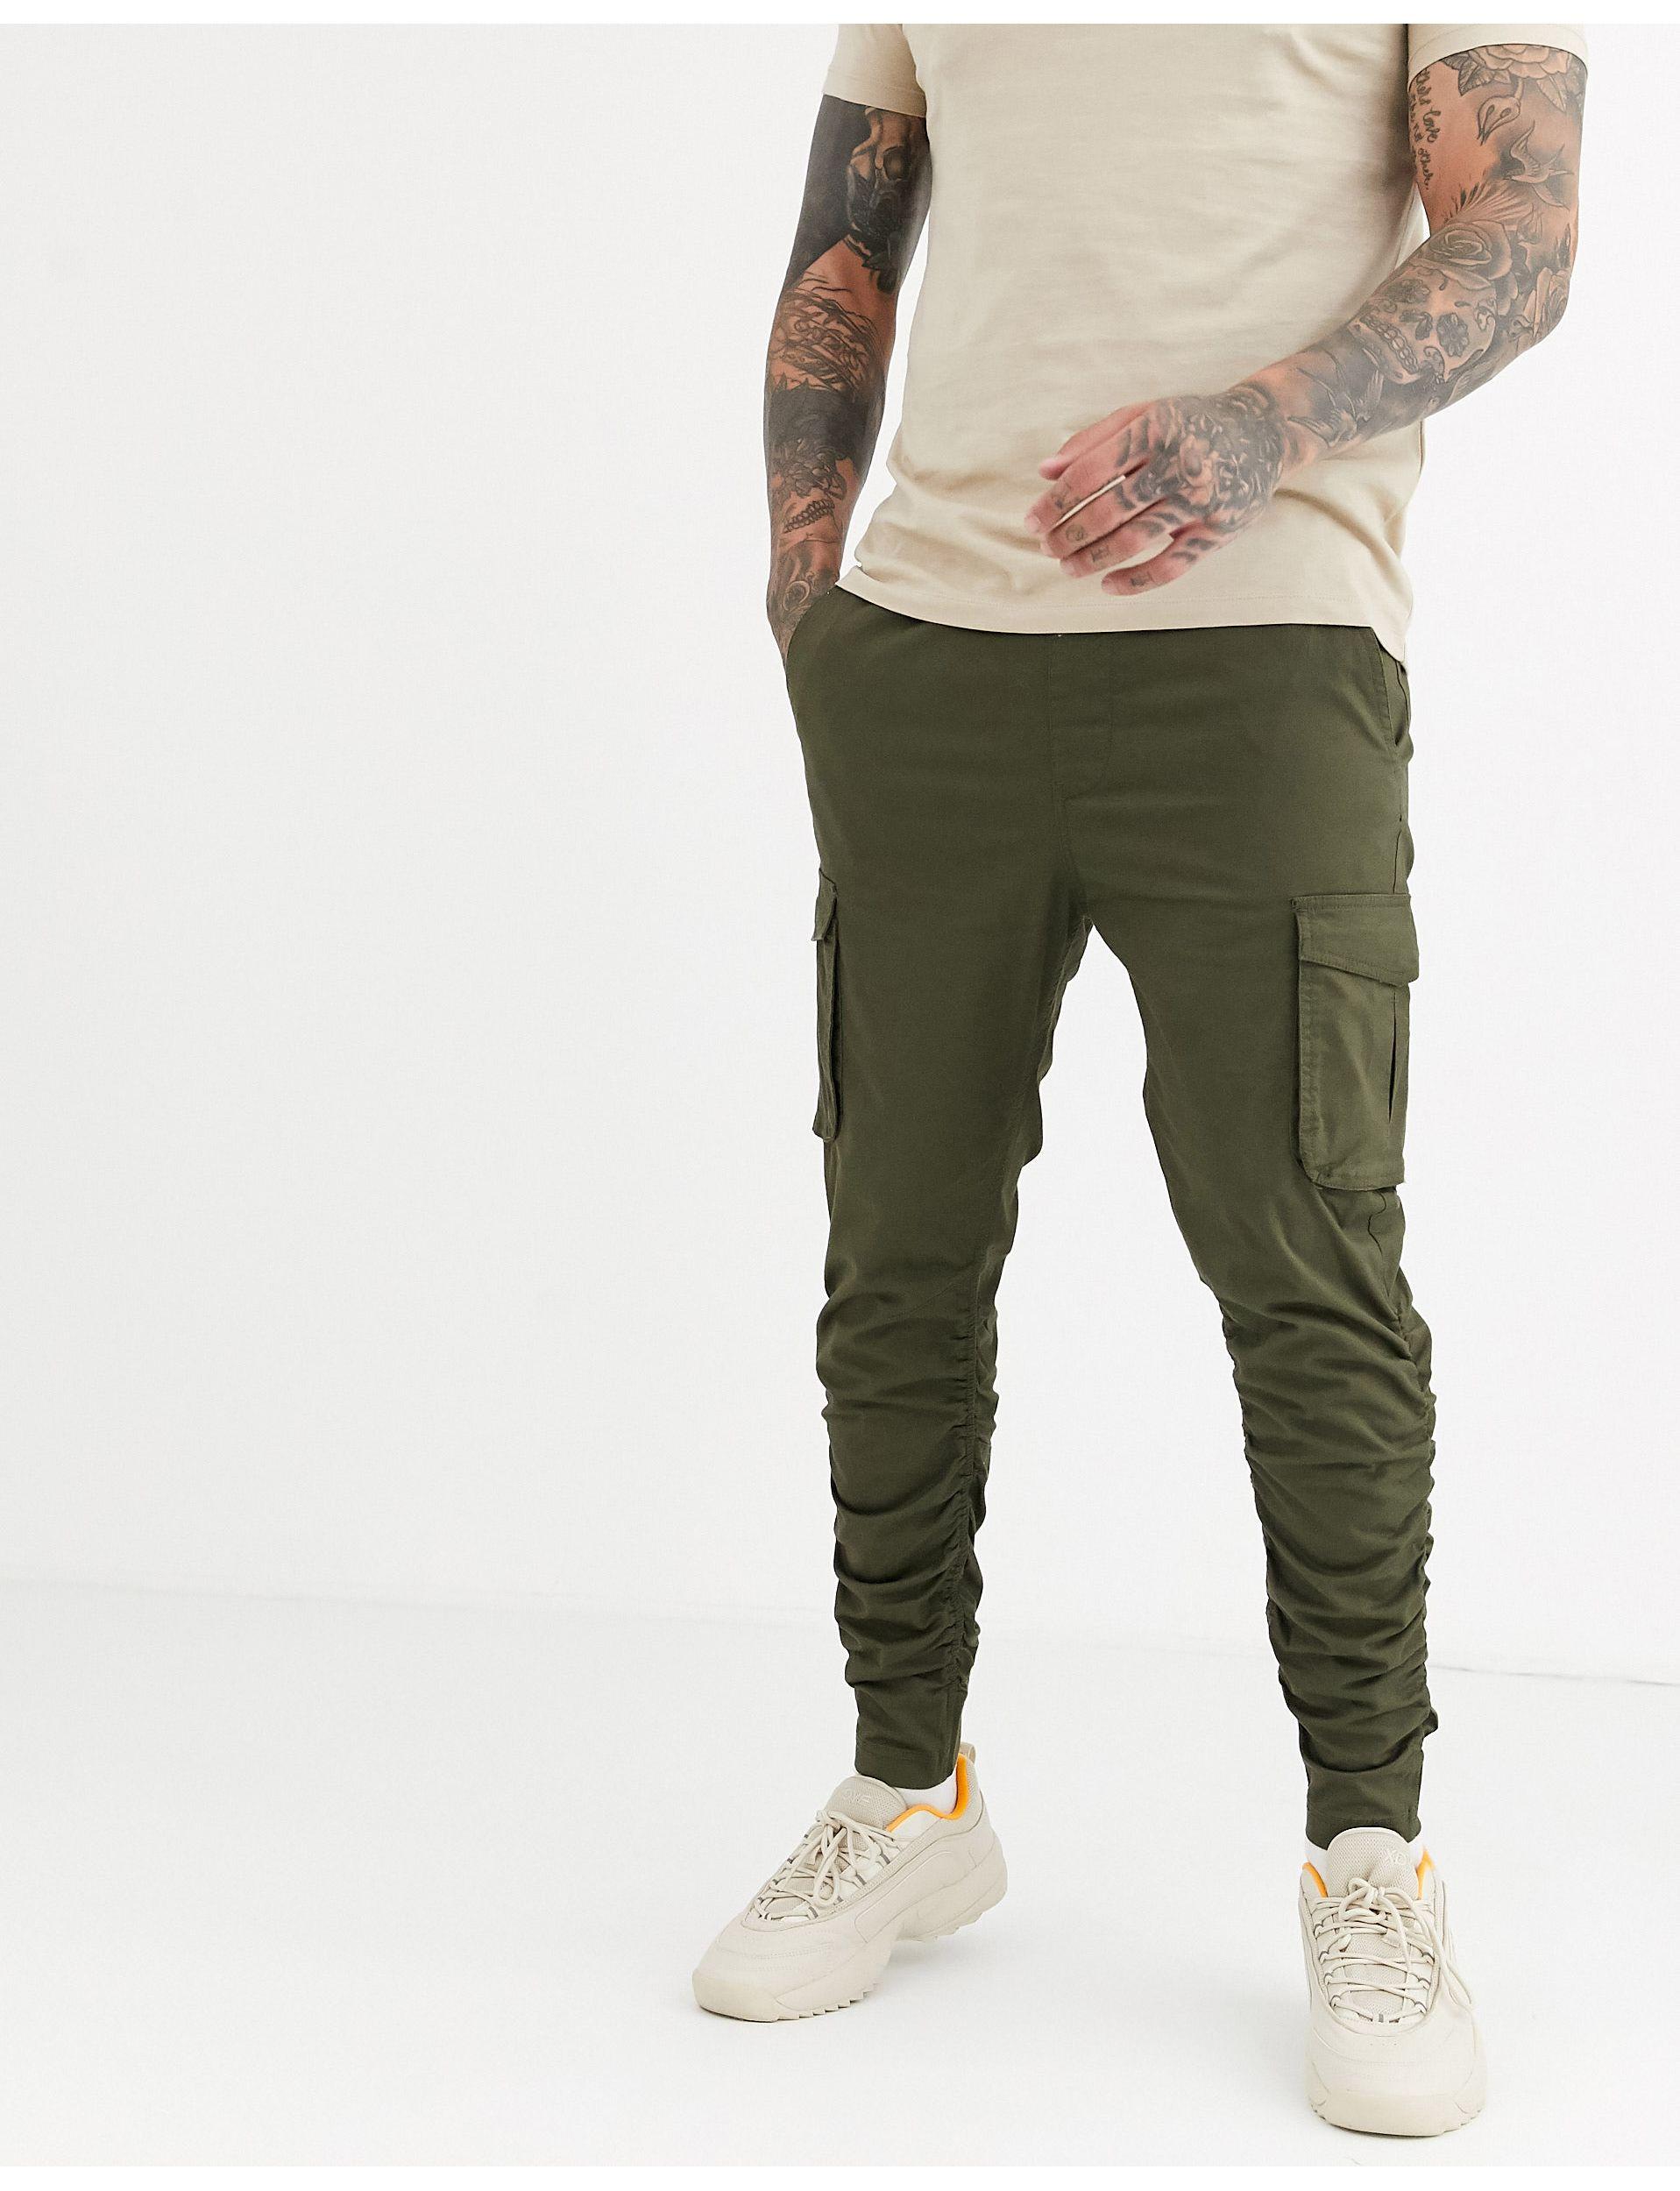 Pull&Bear Denim Join Life Cargo Trouser With Ruched Detailing in Green for  Men - Lyst